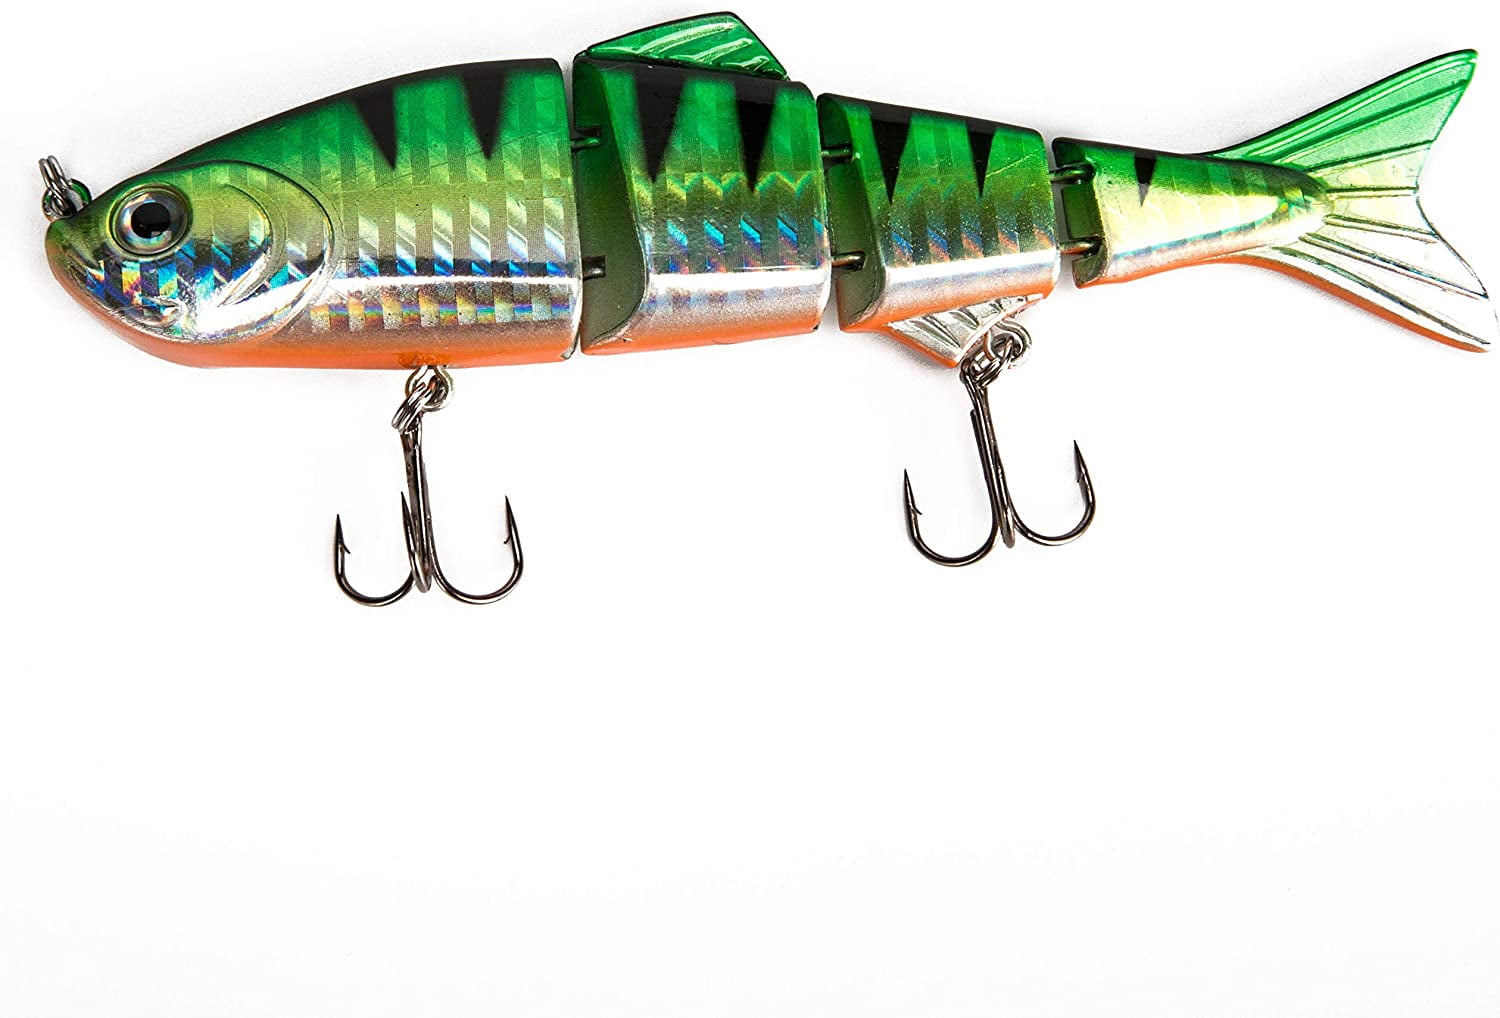 Freshwater Saltwater Coarse Sea Crank Trout Fly Tackle Bass Fishing Lures  Crankbait Baits peche leurres RHA-50-14 50mm 5g